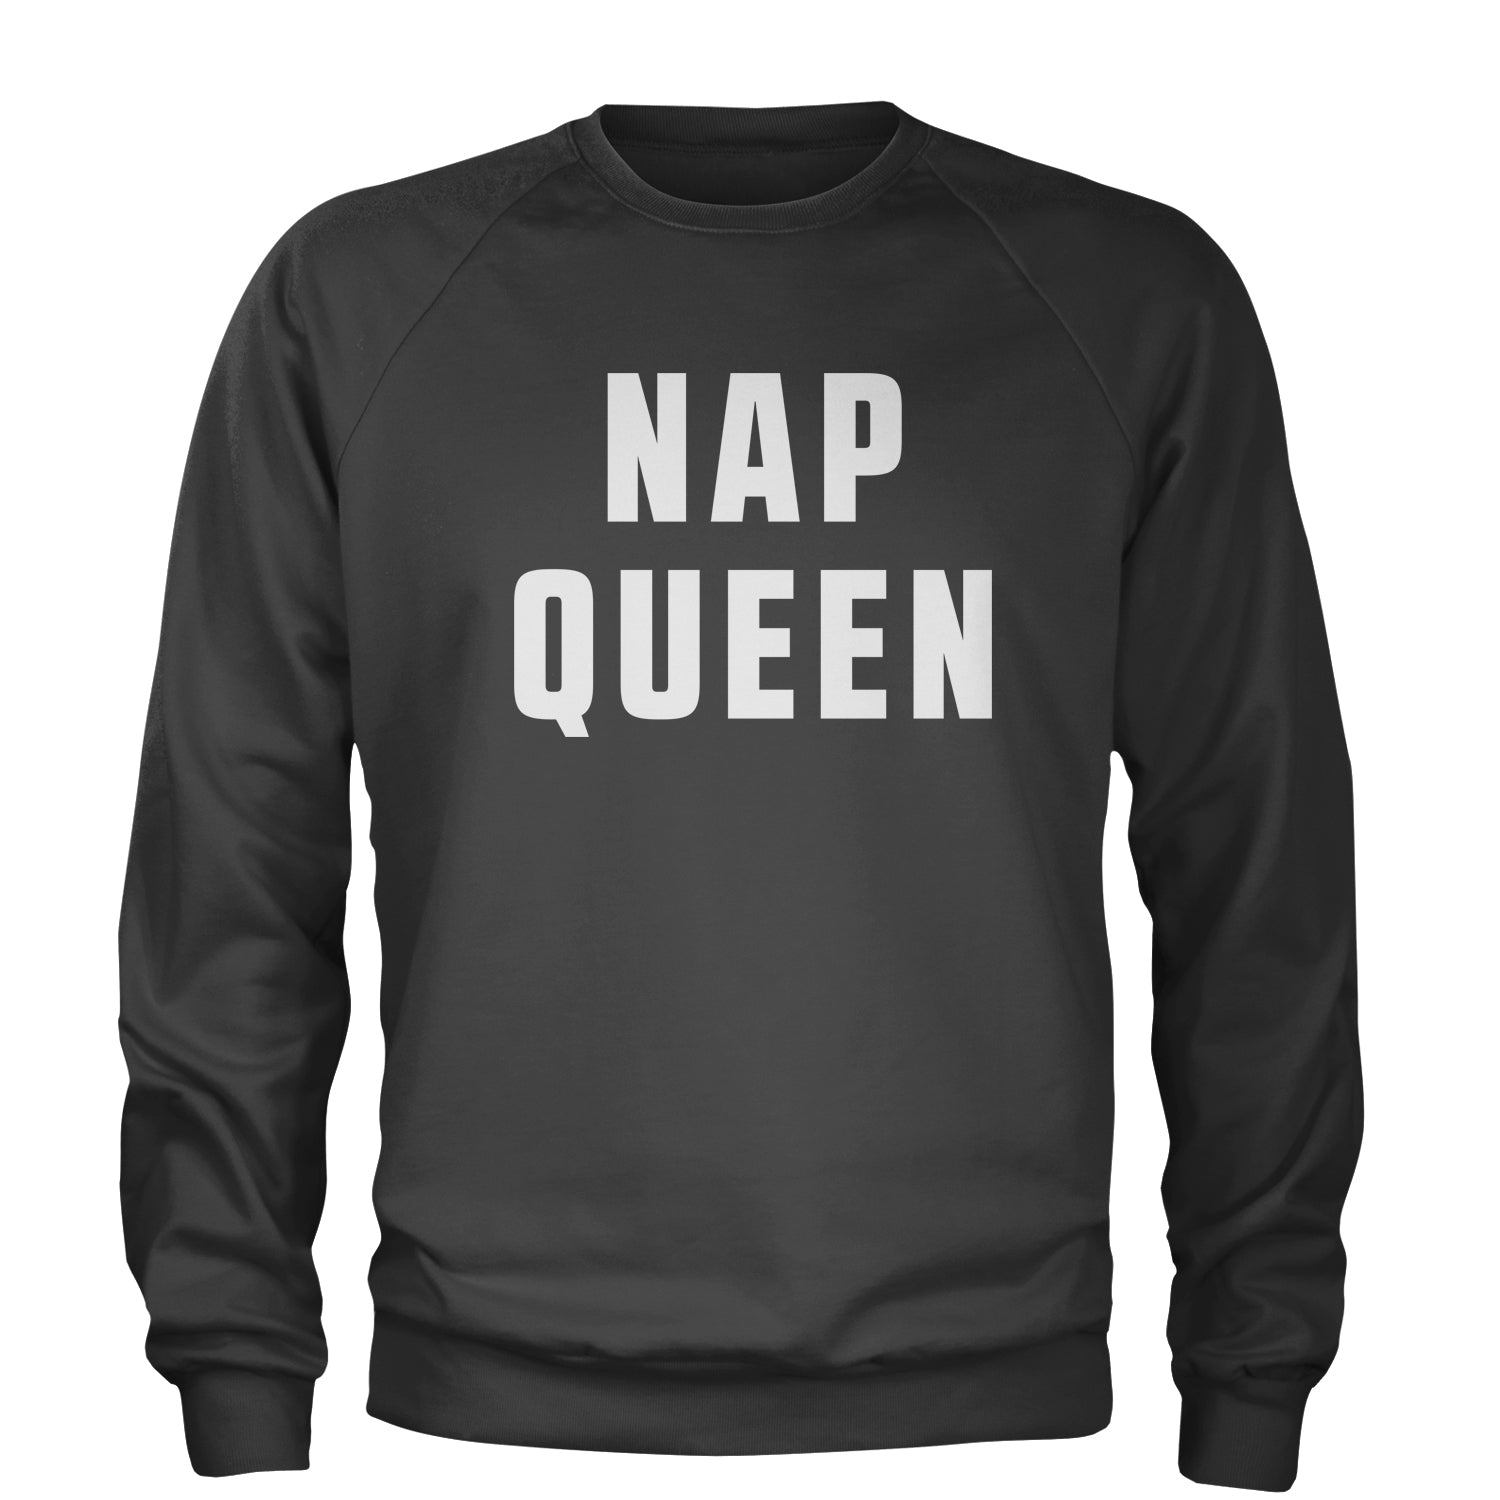 Nap Queen (White Print) Comfy Top For Lazy Days Adult Crewneck Sweatshirt all, day, function, lazy, nap, pajamas, queen, siesta, sleep, tired, to, too by Expression Tees